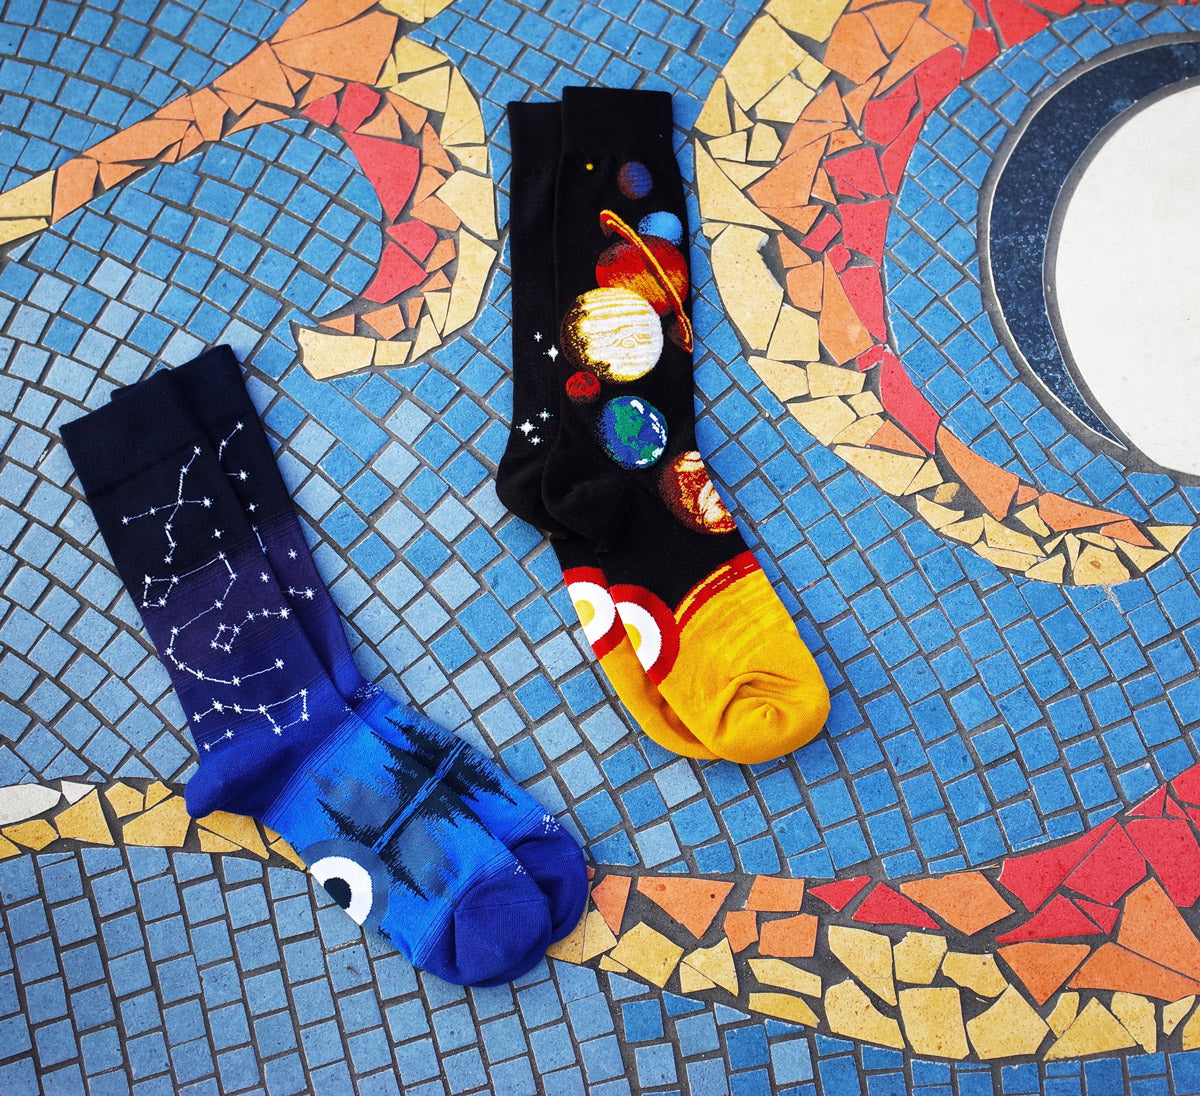 Socks with stars and planets placed on a mosaic of space